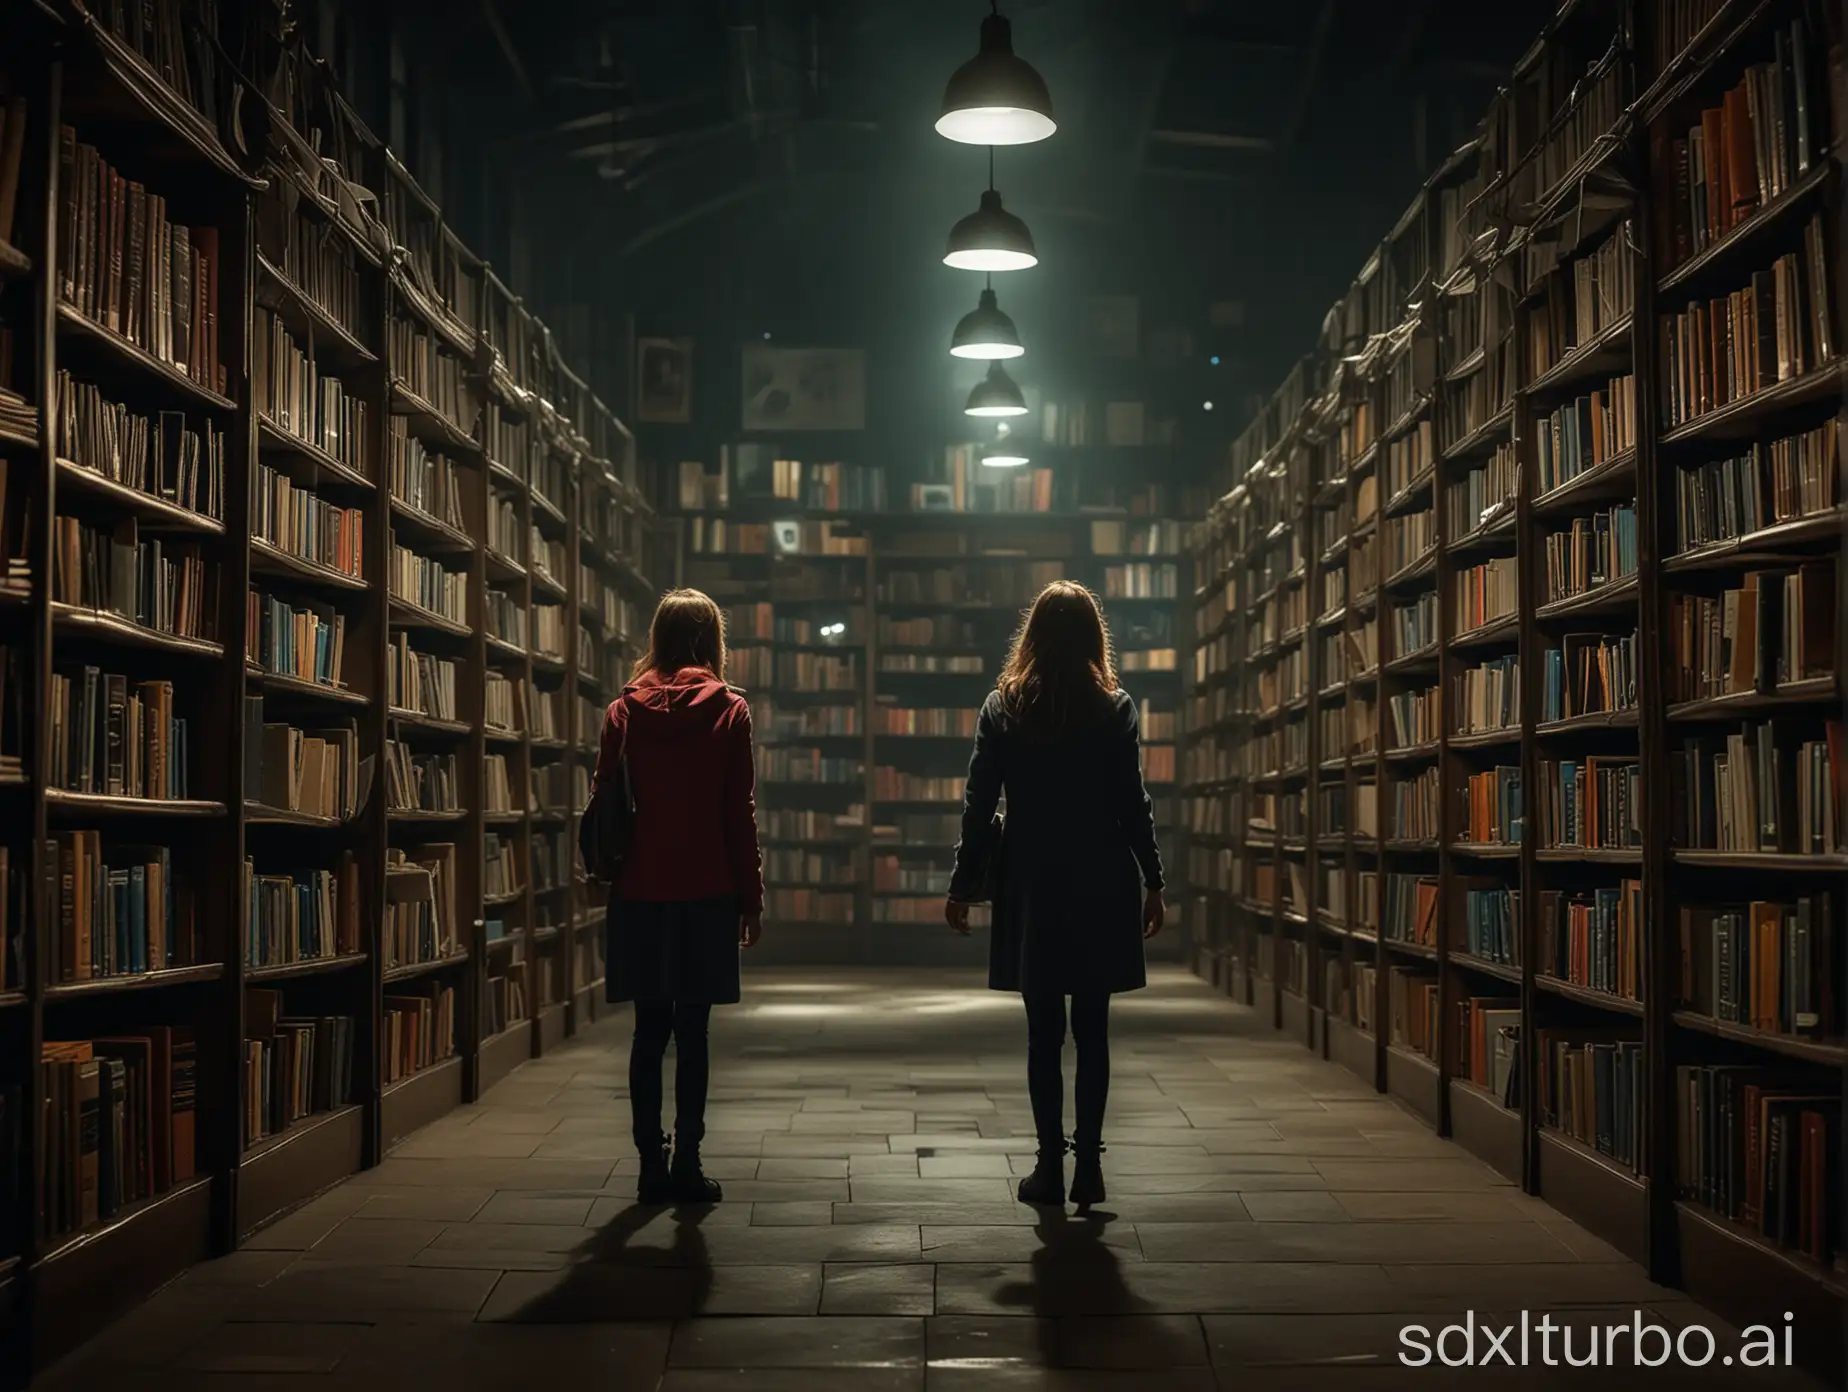 Create a square, 1:1 aspect ratio, high definition, scary image of a library scary story. The image must be photorealistic, mysterious, realistic people, scary stranger, weird, scary, atmospheric, night lights, vivid colors, catchy, must pop and catch attention. Shot on Sony Alpha a7R, 80mm.